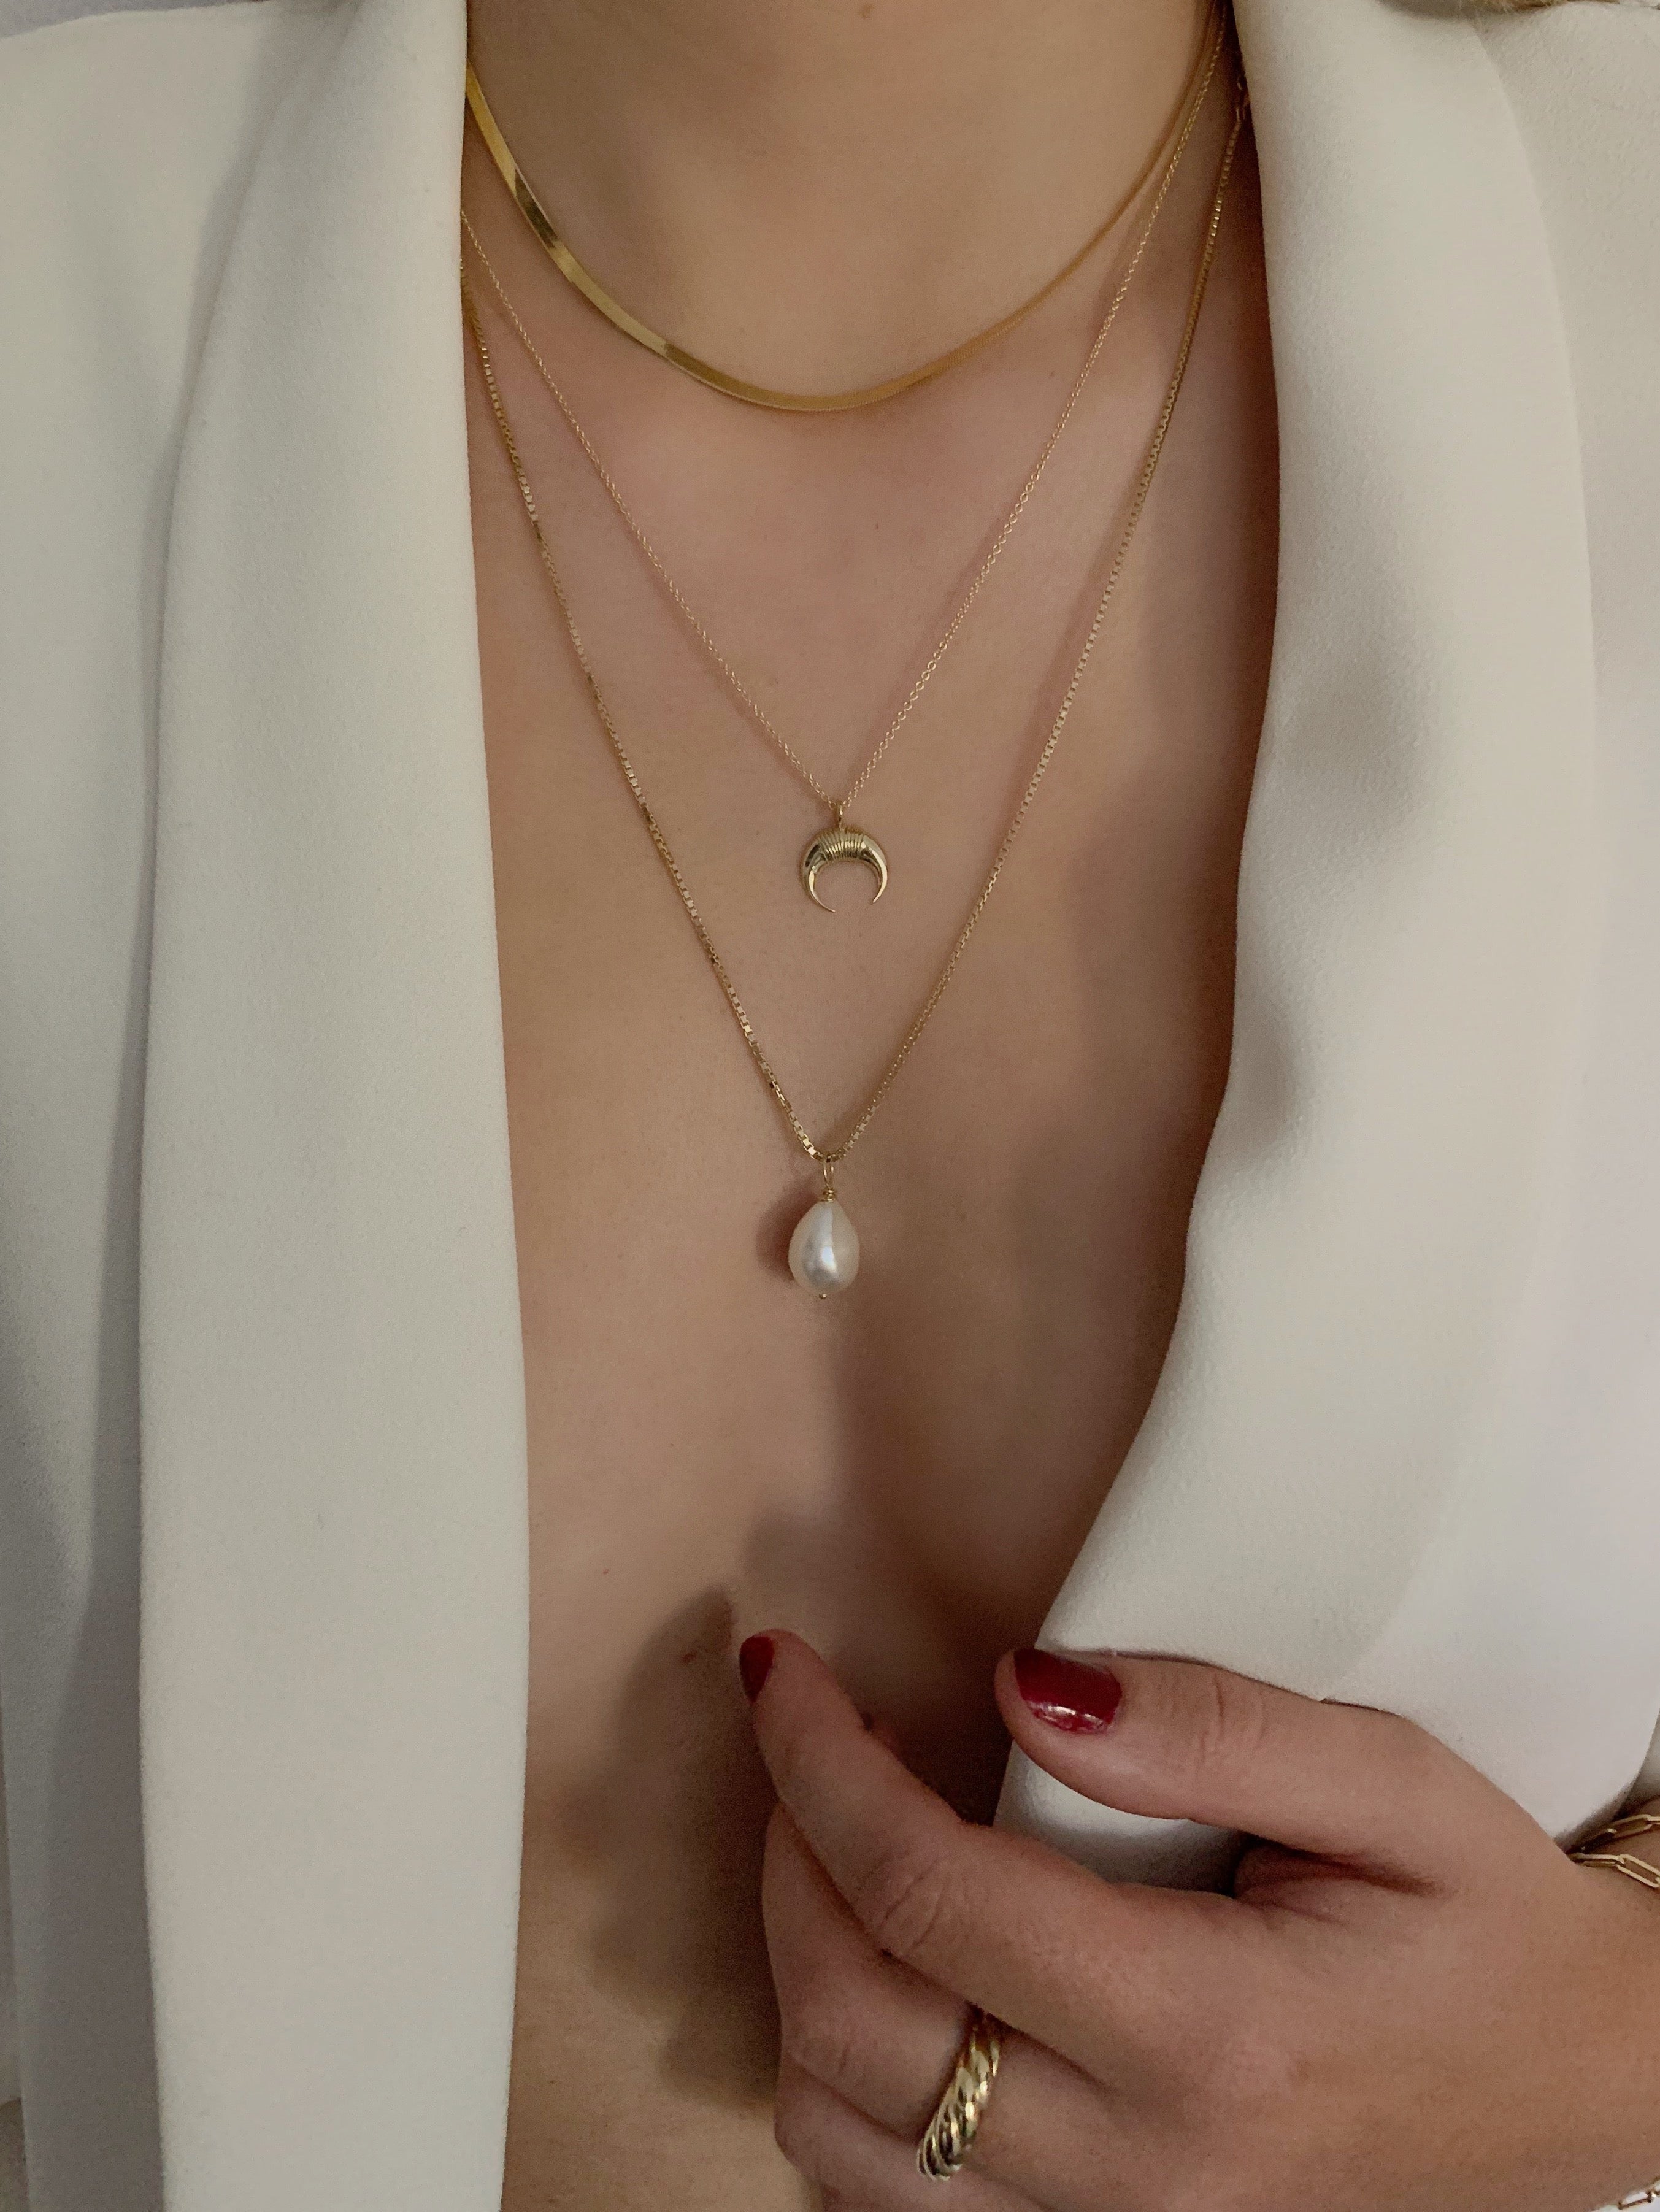 alt="Baroque Pearl Pendant I styled with yoonicorn necklace and carter necklace"